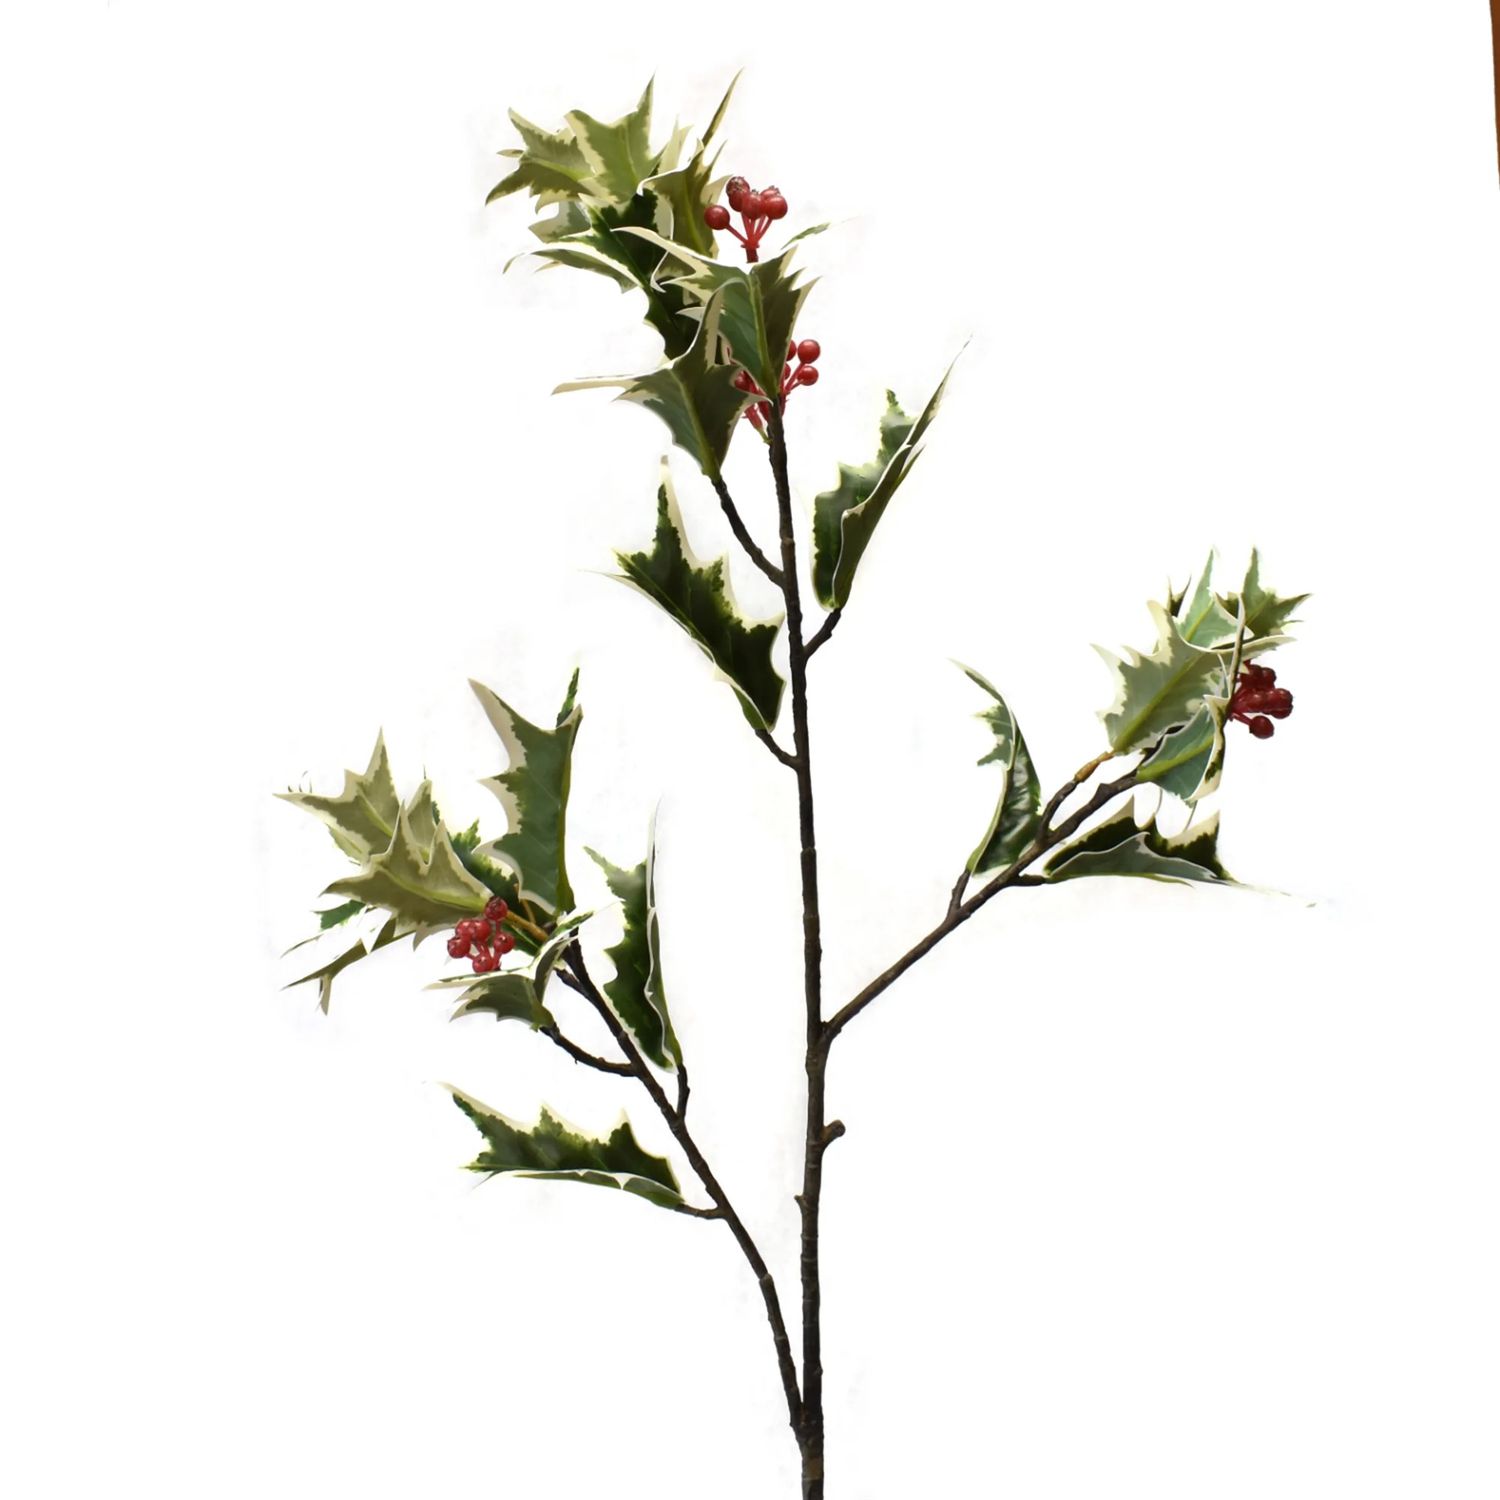 Faux holly berry sprig for holiday decorating.